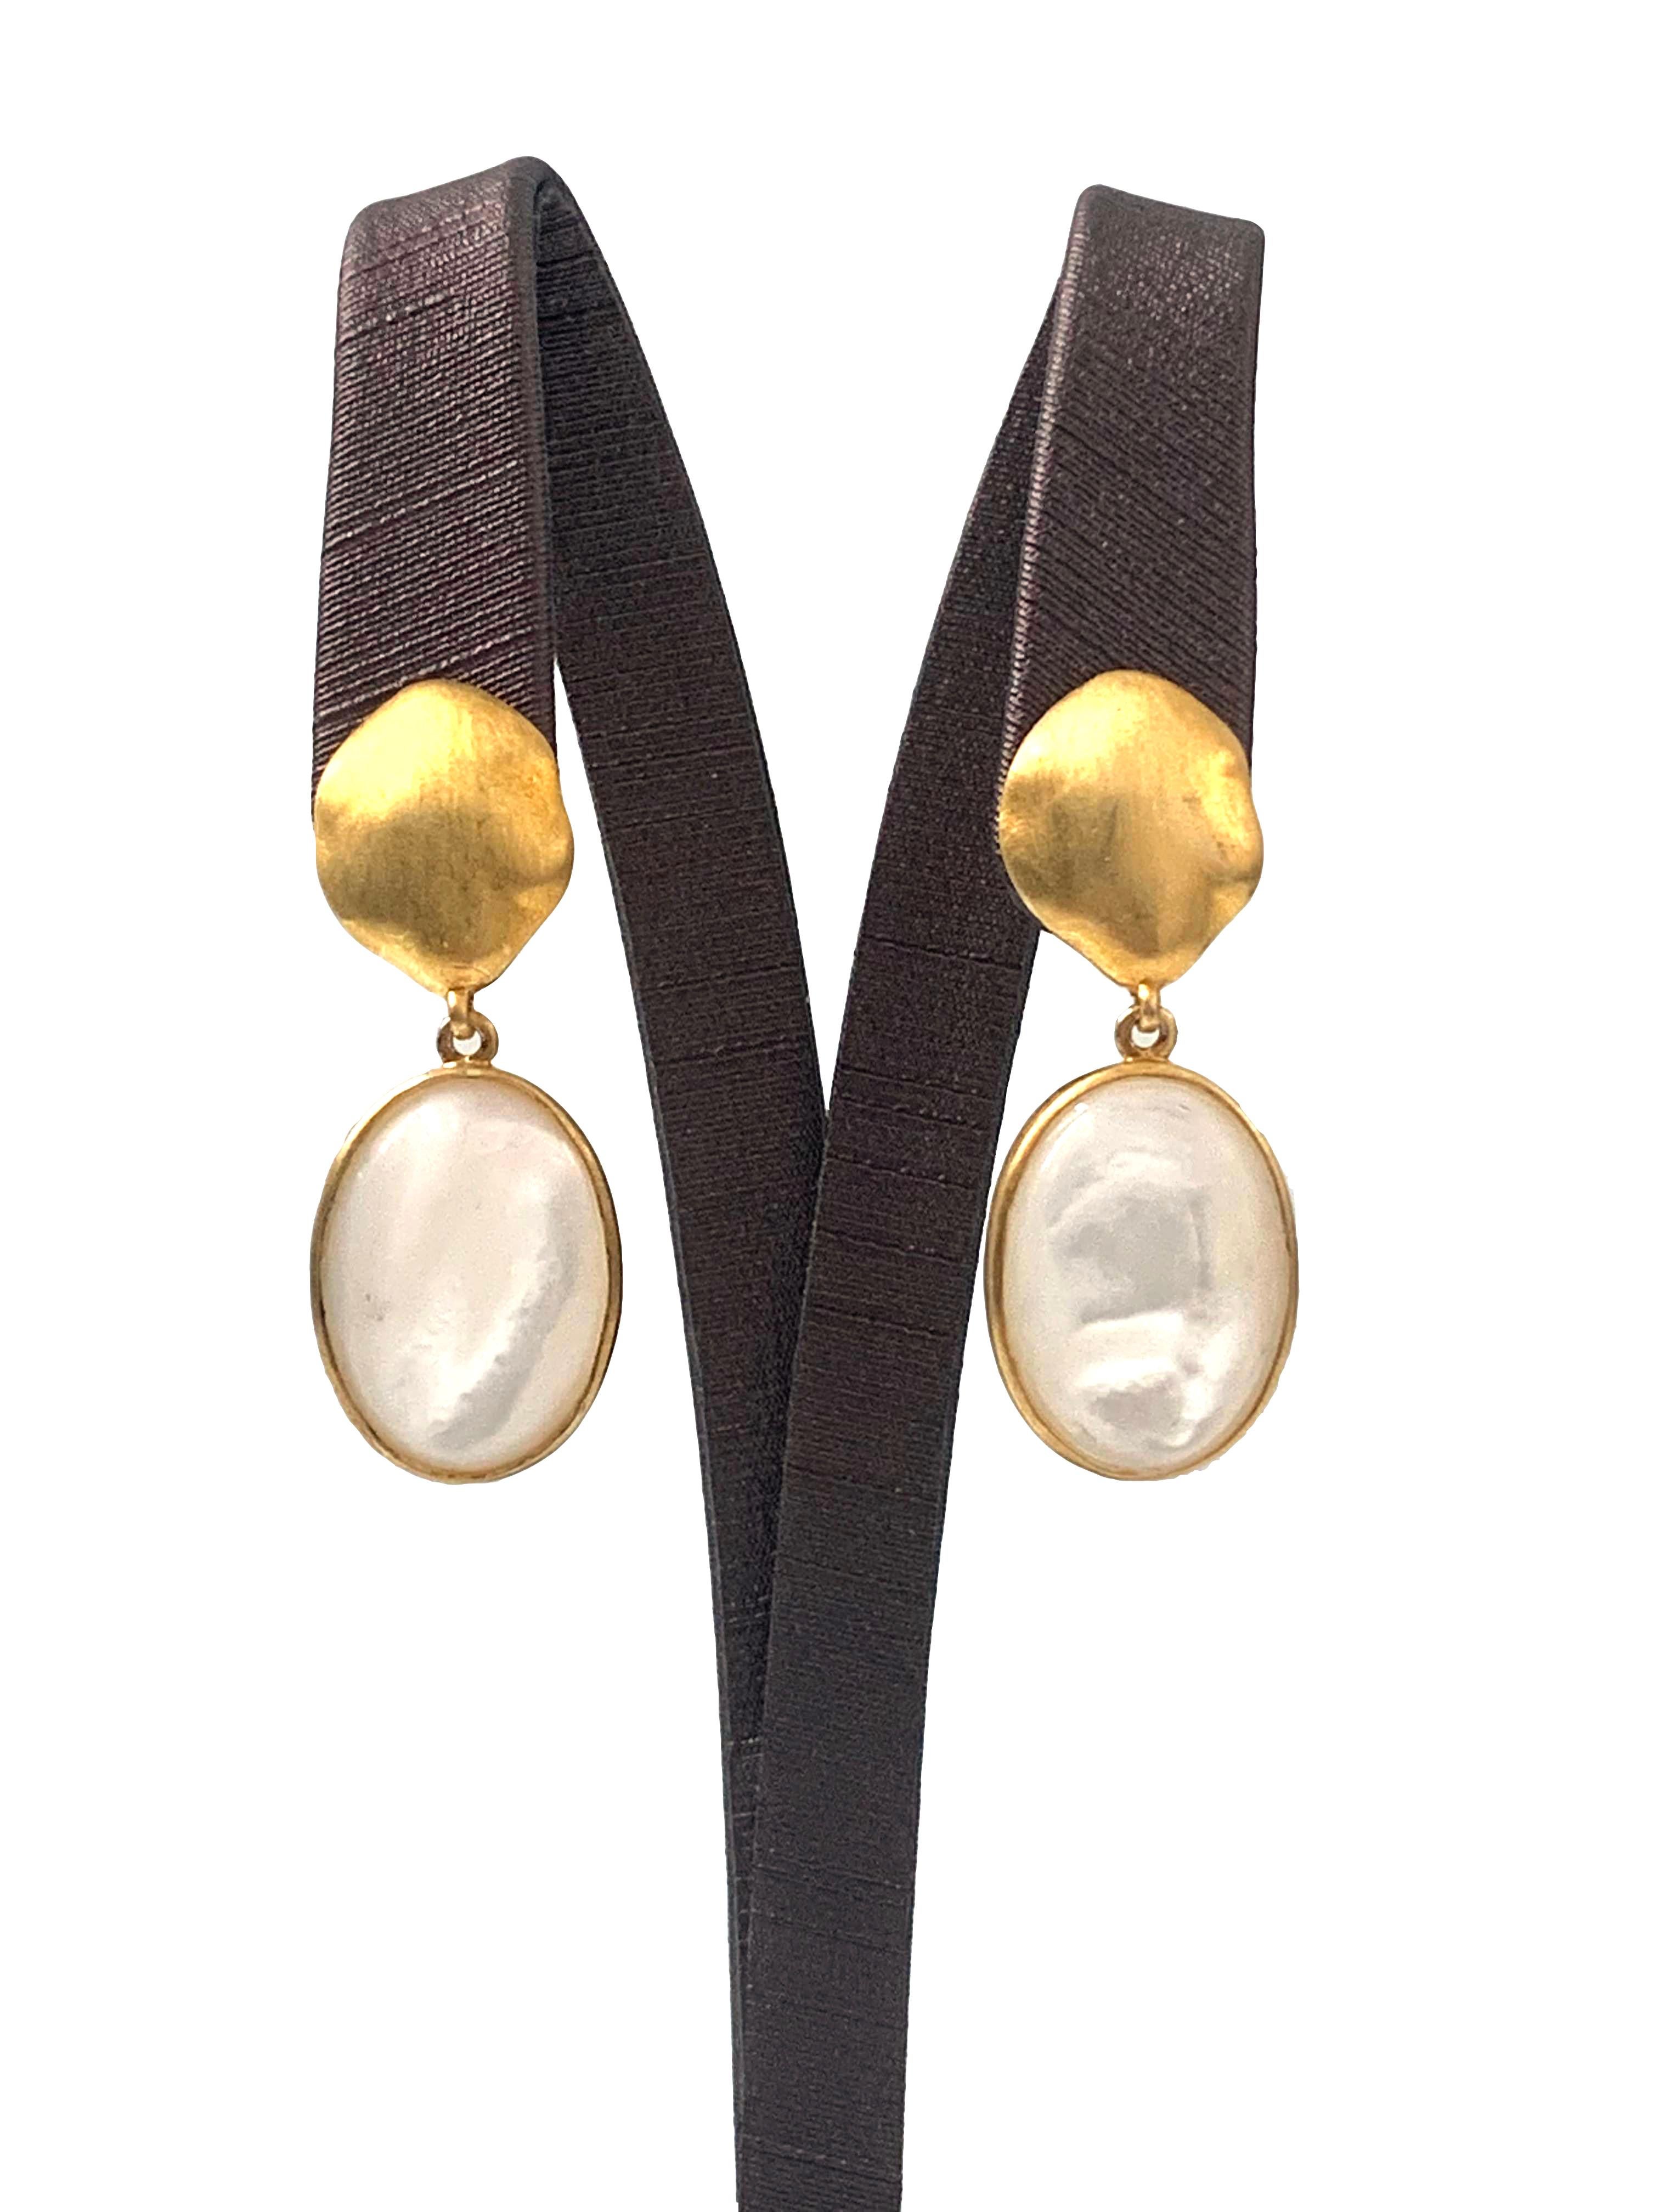 Discover oval Mother of Pearl vermeil drop earrings. The earrings feature 2 large oval-shape cabochon-cut Mother of Pearl with unique and beautiful luster, handcrafted brushed satin texturing technique, and hand set in vermeil 18k gold plated